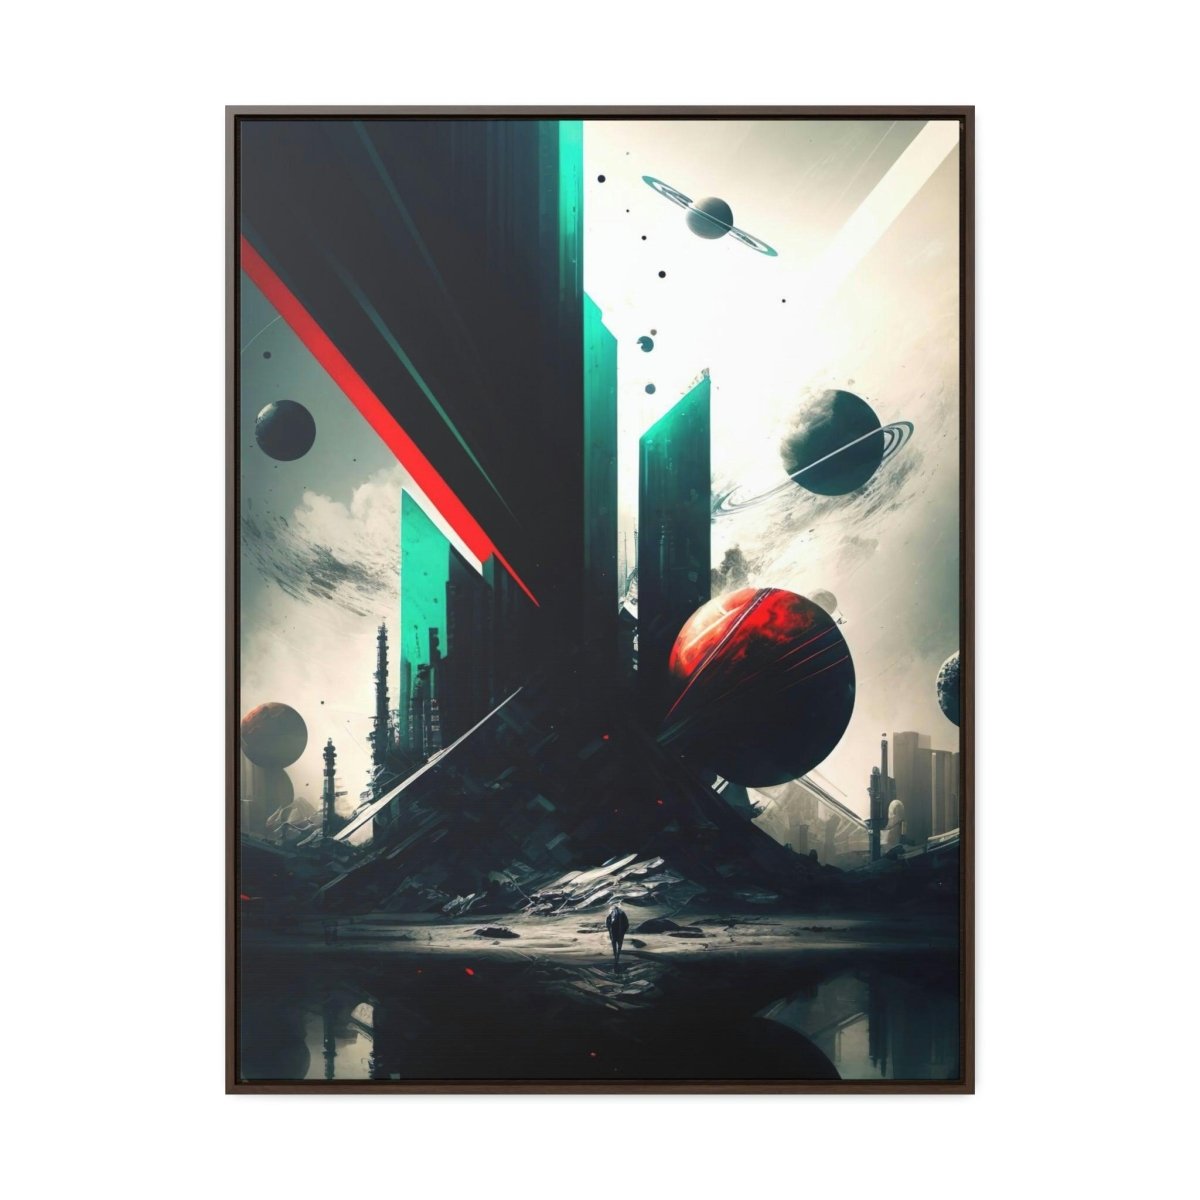 Metropolis Futuristic City On A Planet Surrounded By Planets- Digital Art Framed - HigherFrequencies